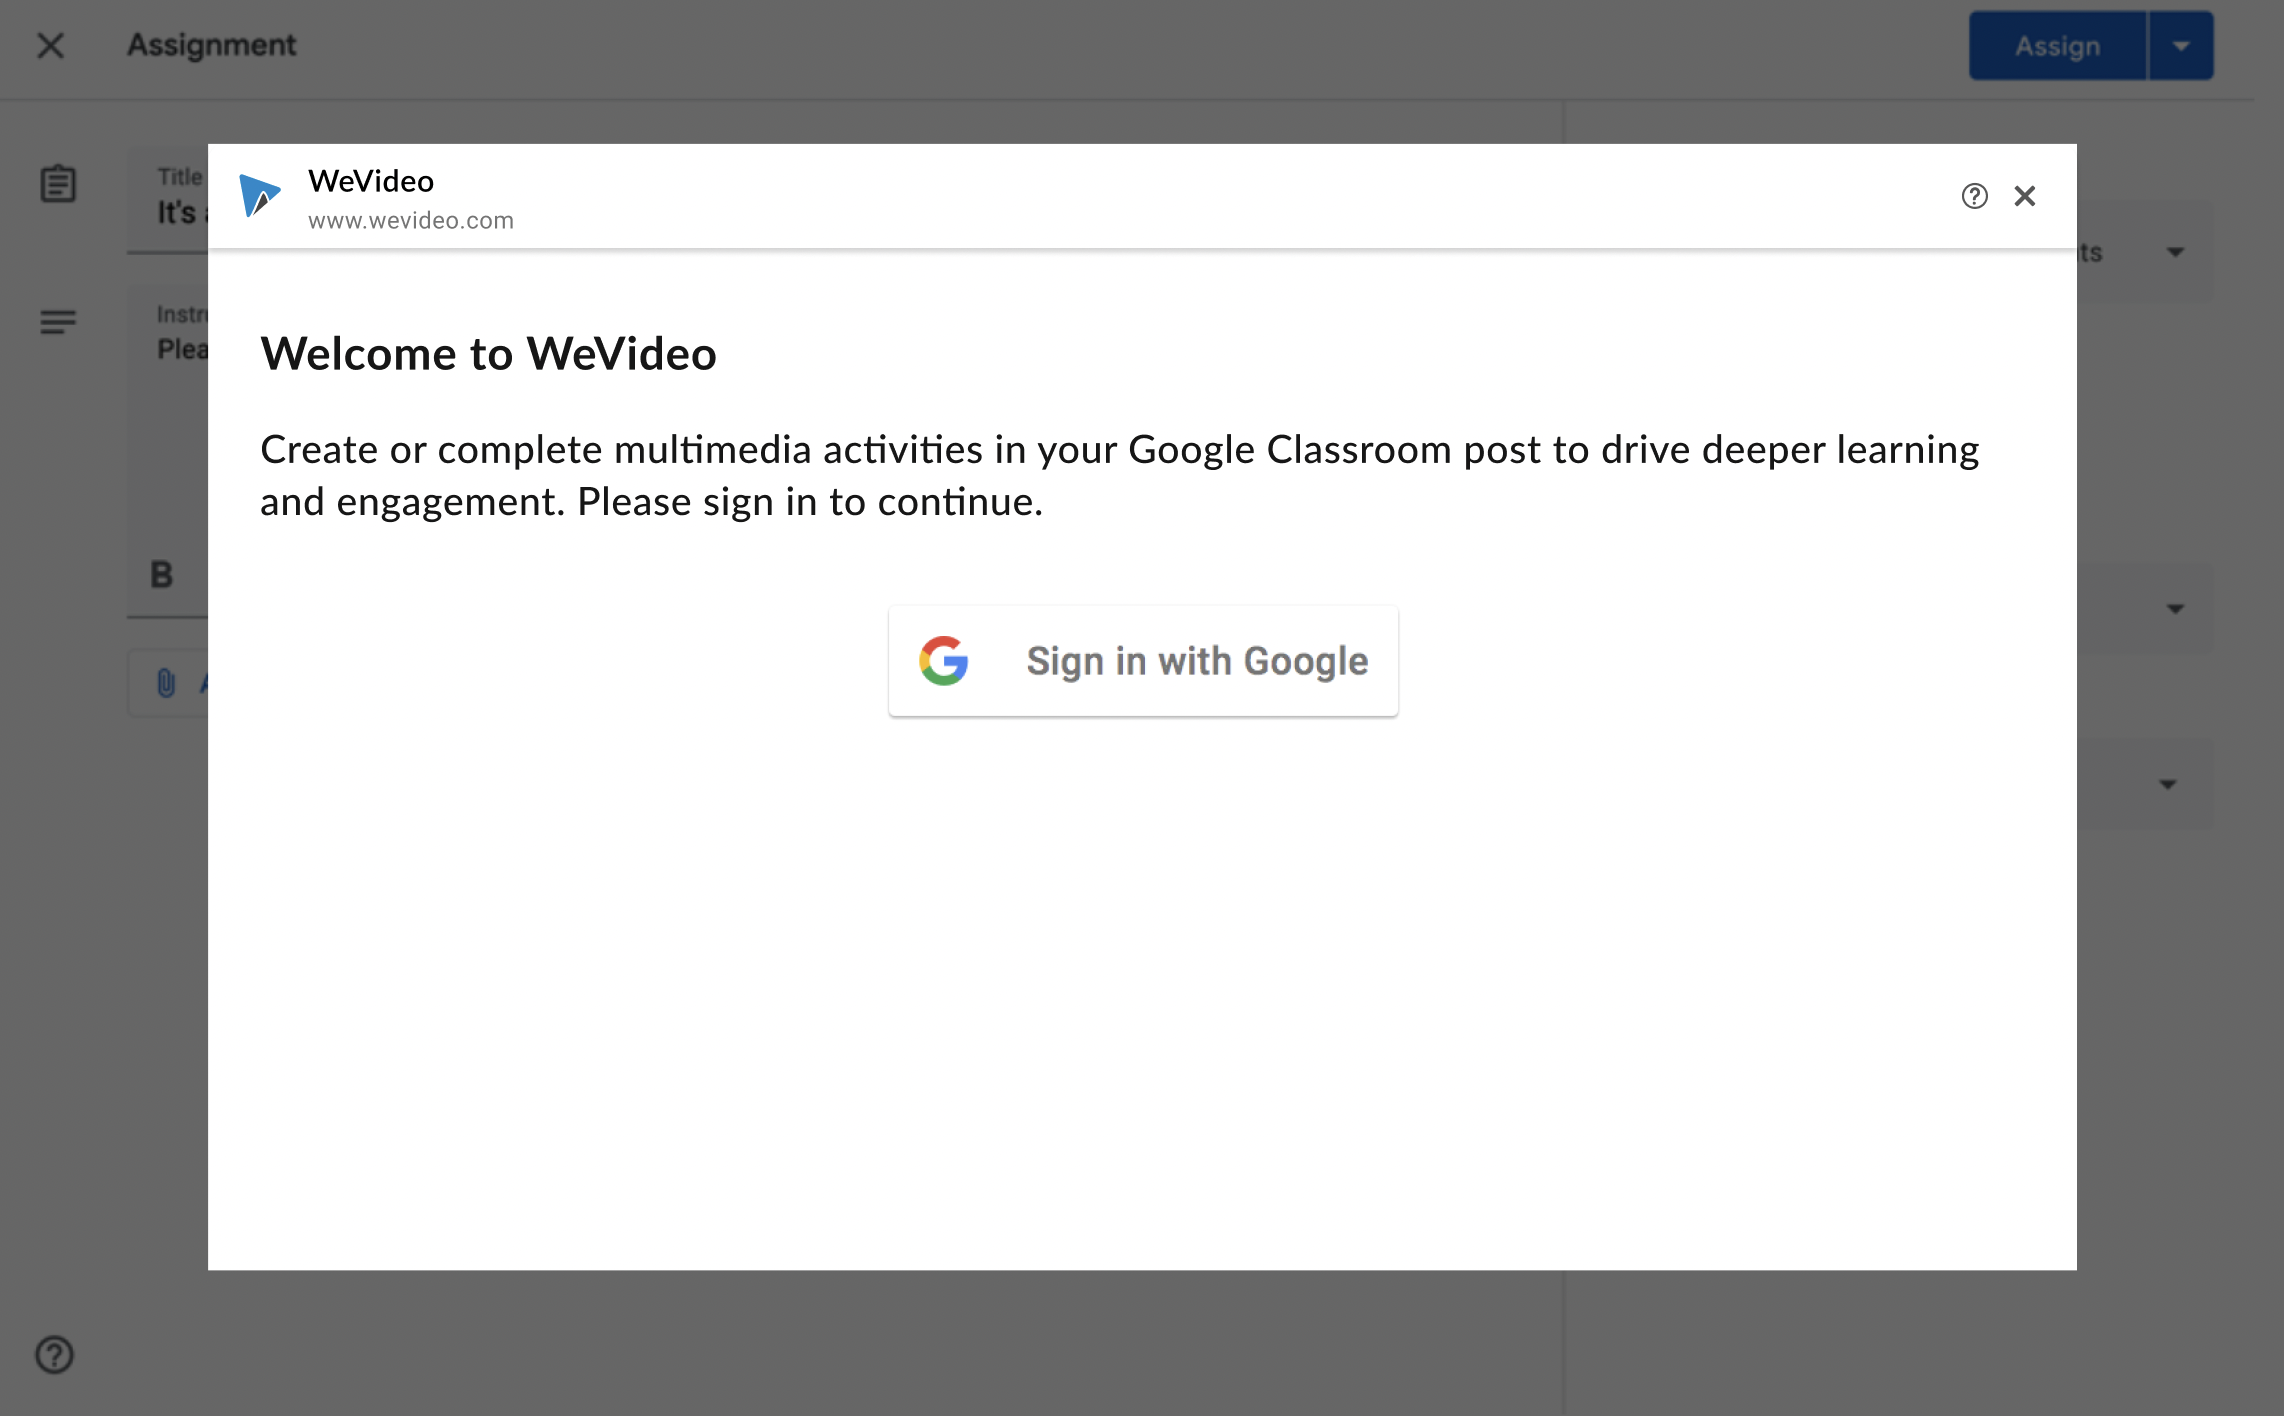 How to Create a Google Classroom on Desktop or Mobile